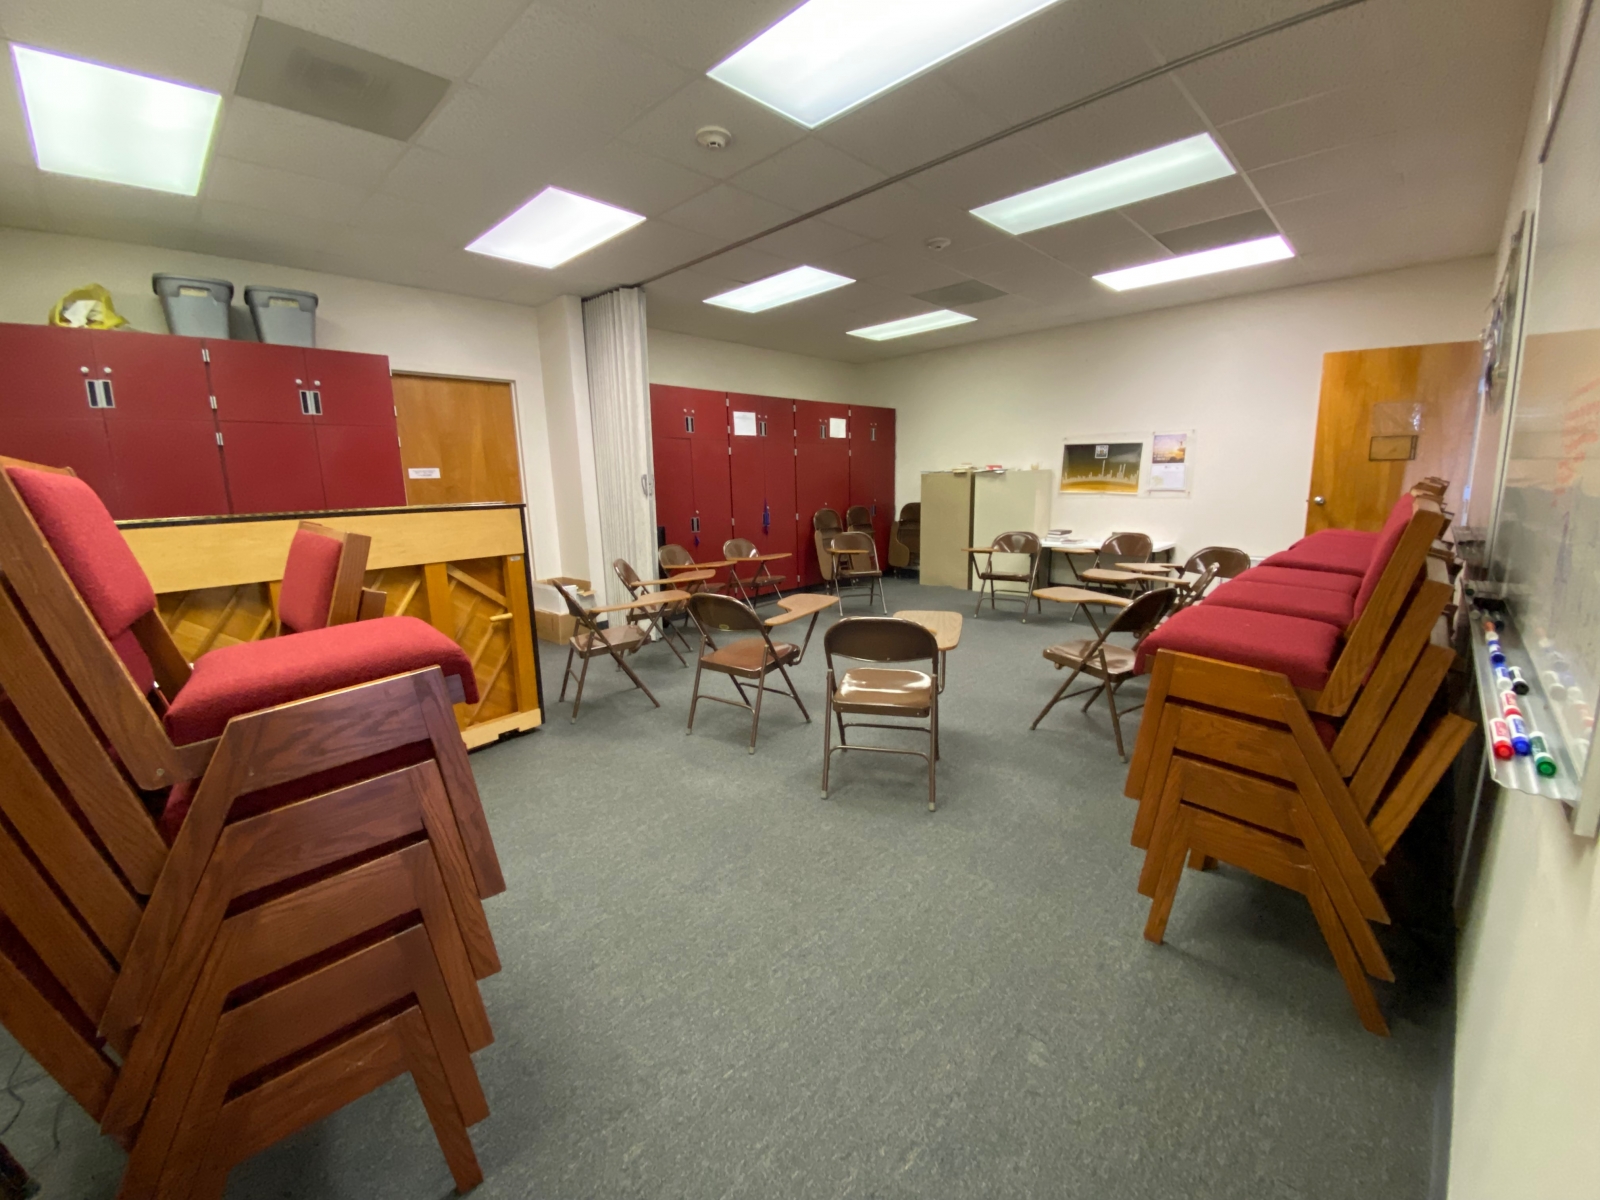 Room 214 has student desks and a piano.